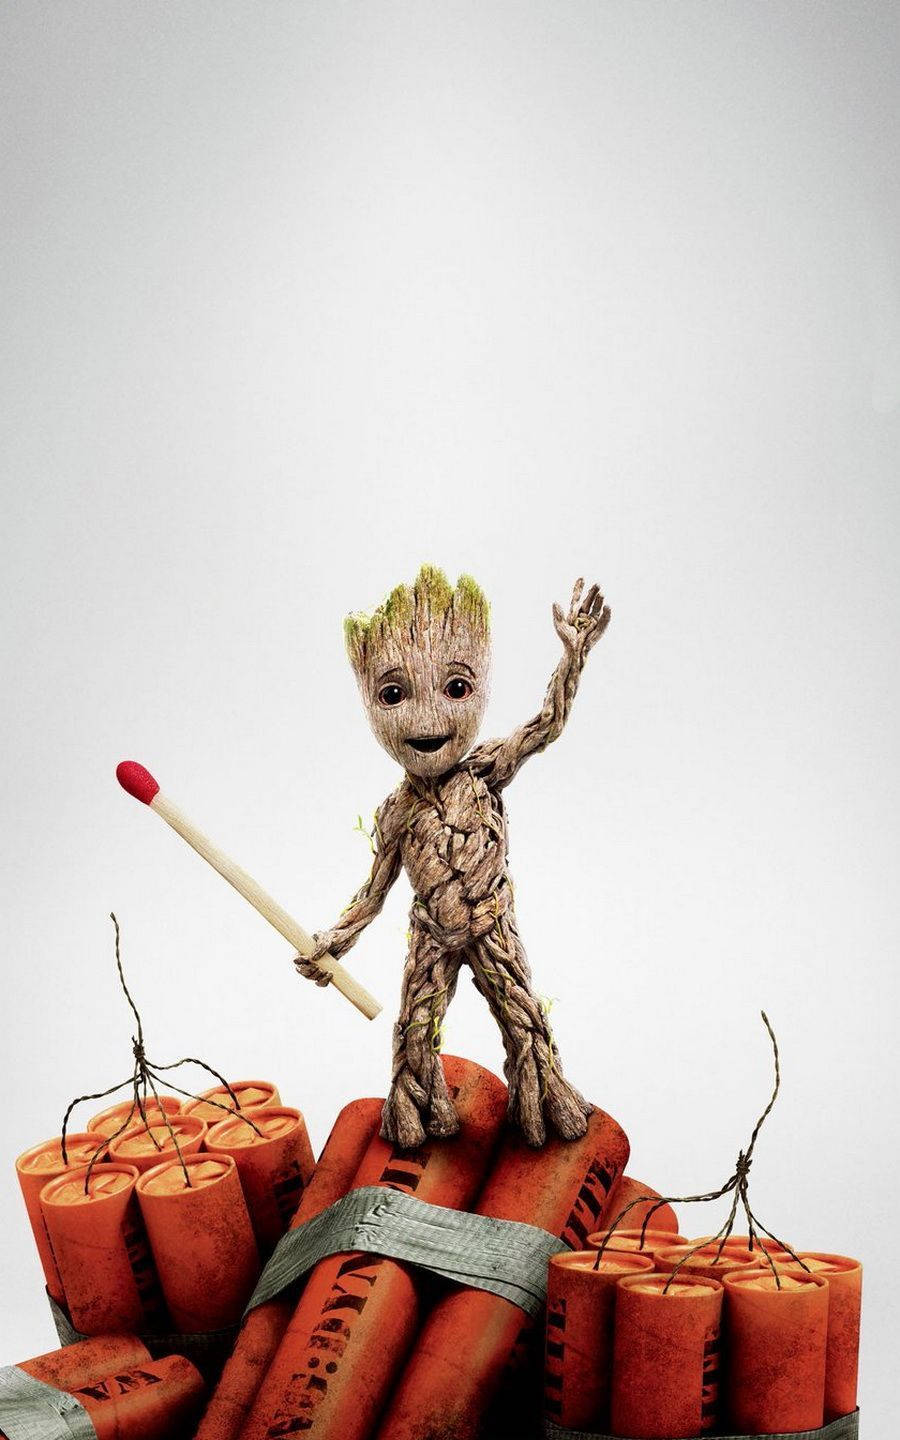 4k Guardians Of The Galaxy With Baby Groot Over Dynamites Wallpaper